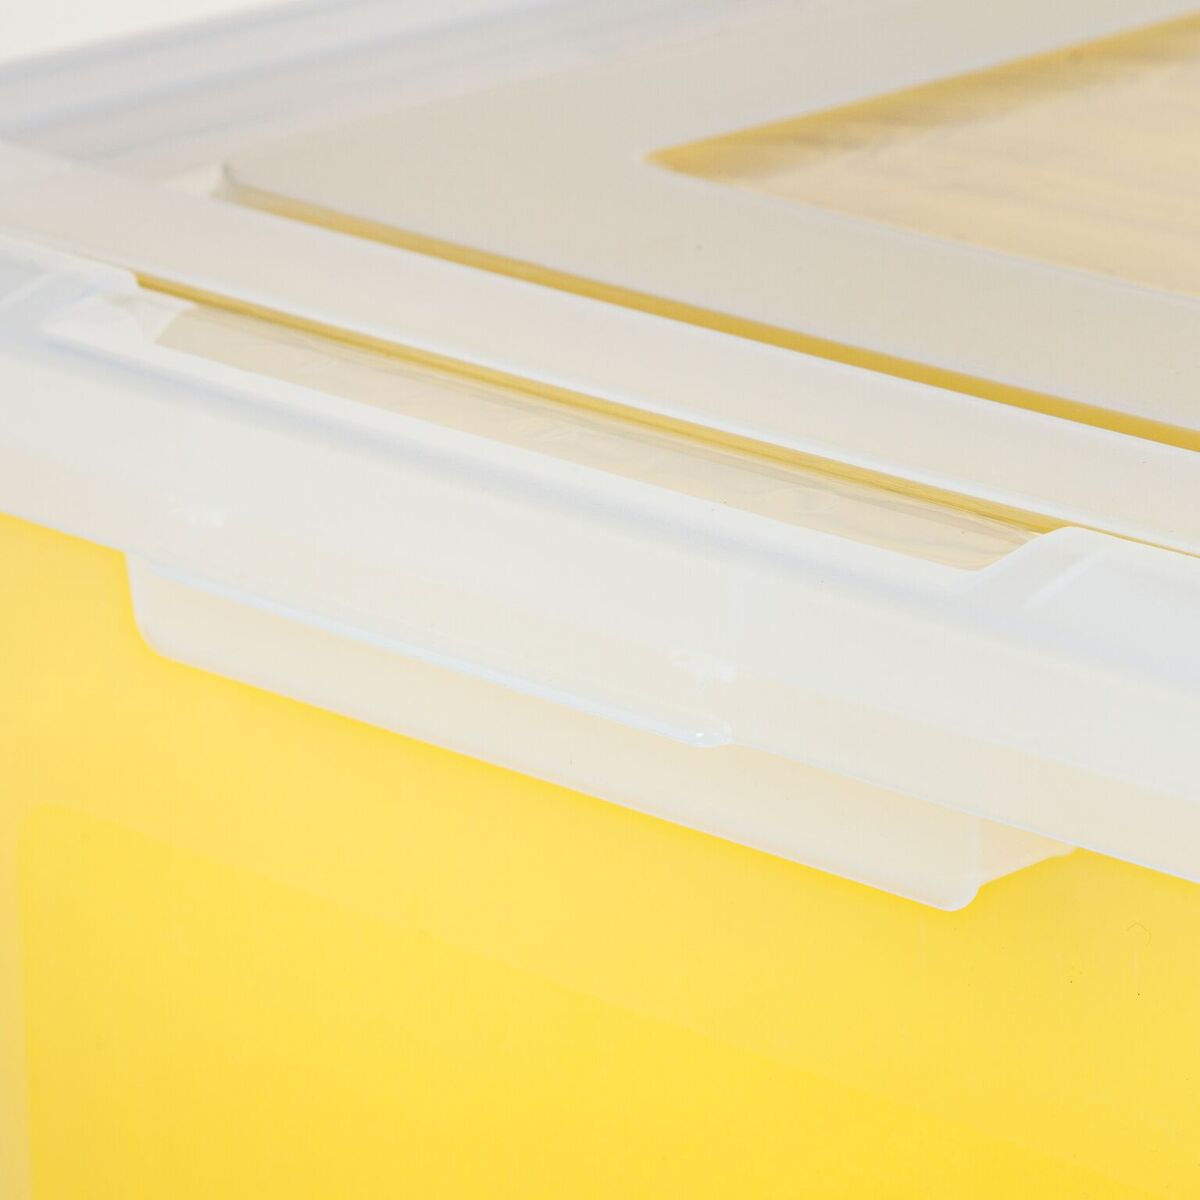 Interlocking lid snaps tight for secure stacking of multiple units. File box is made of clear plastic so you can easily identify the contents.
